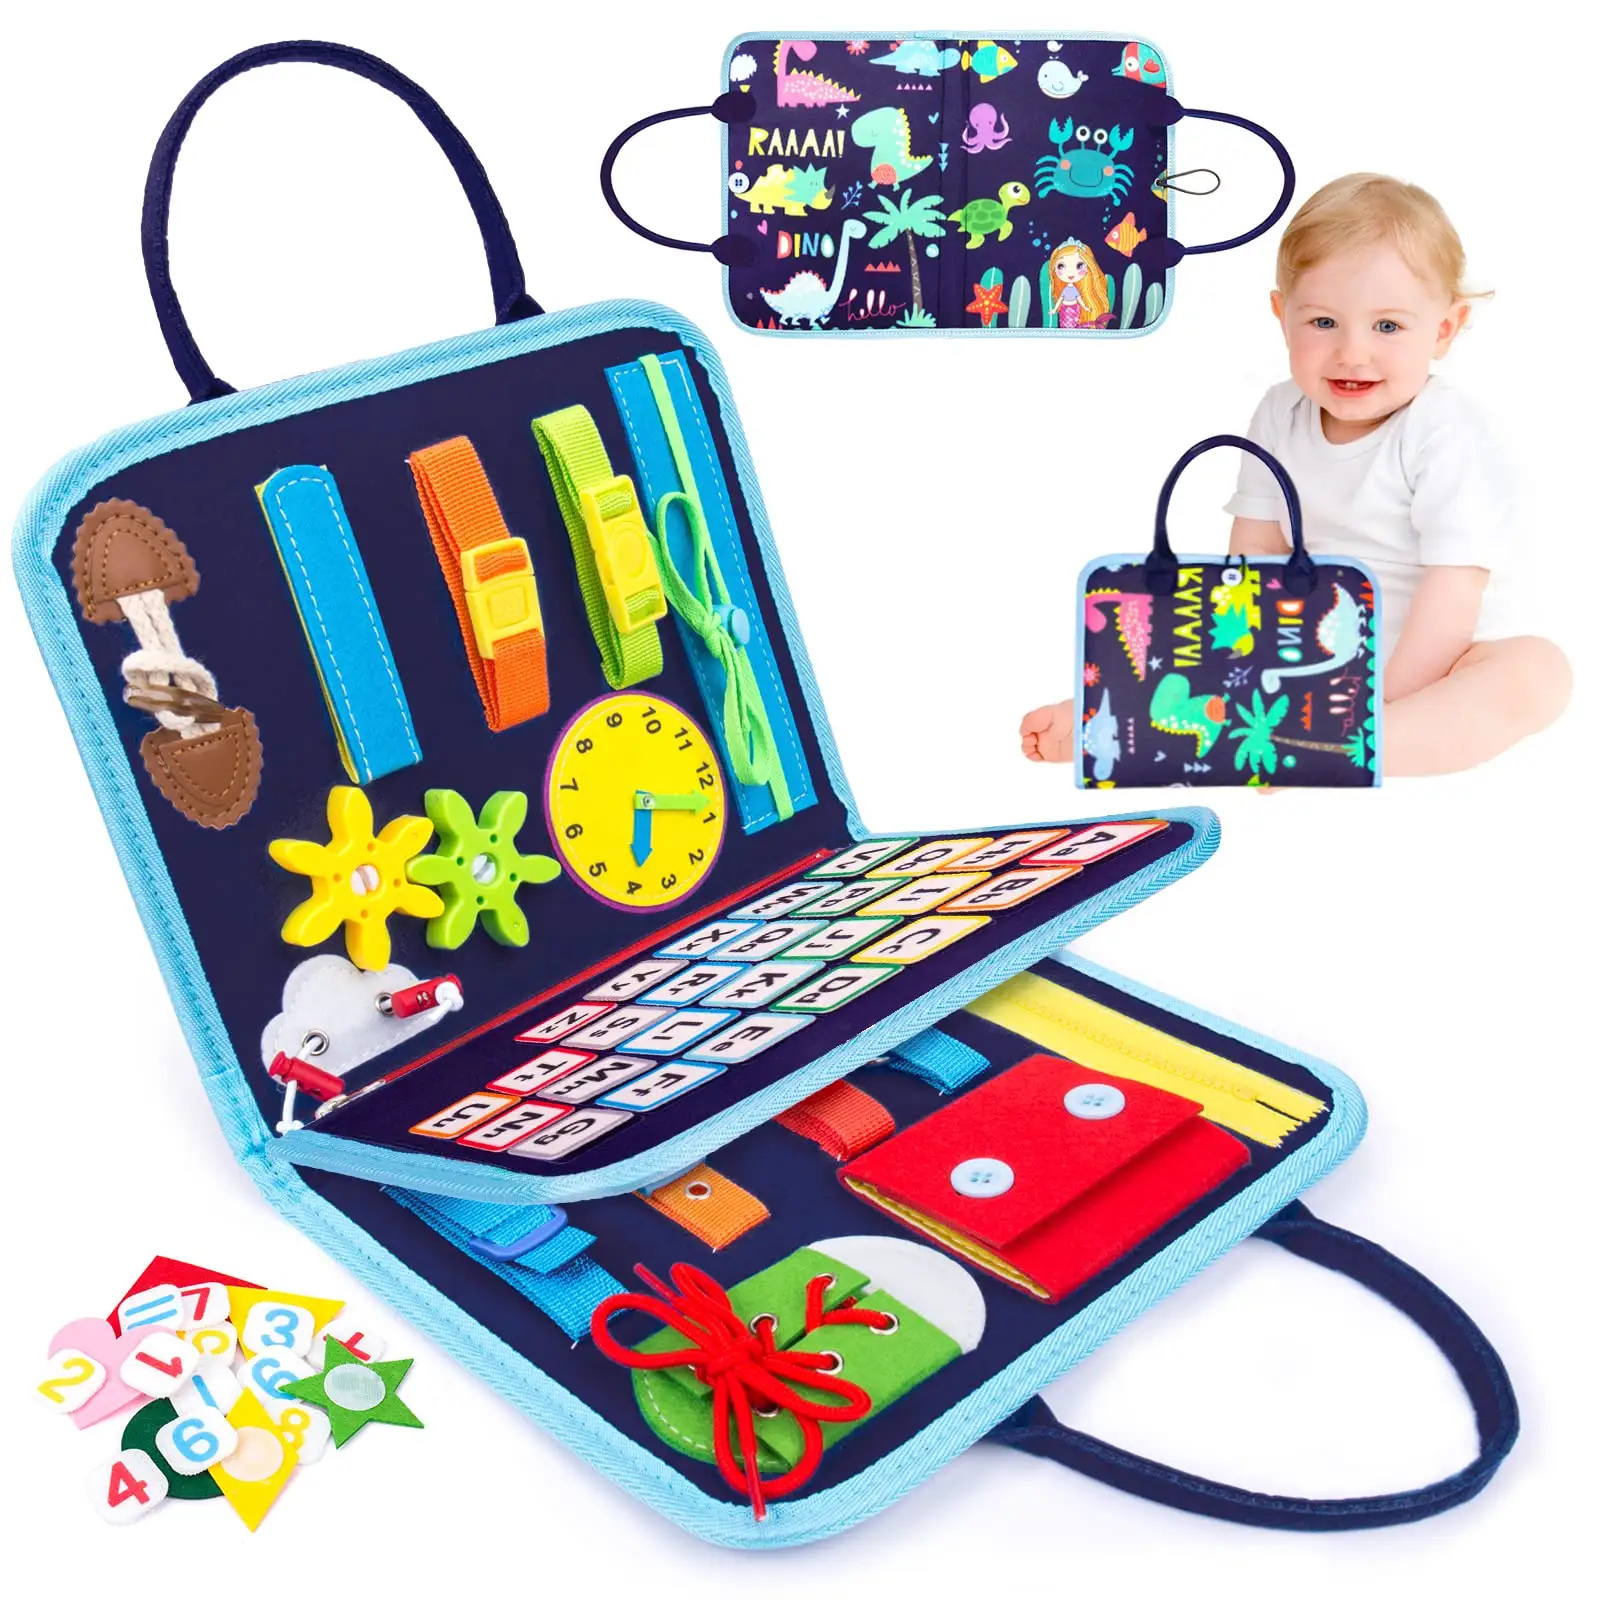 View larger image Add to Compare Share Greenmart children's busy board felt learning board dressing board puzzle toy Kinderg